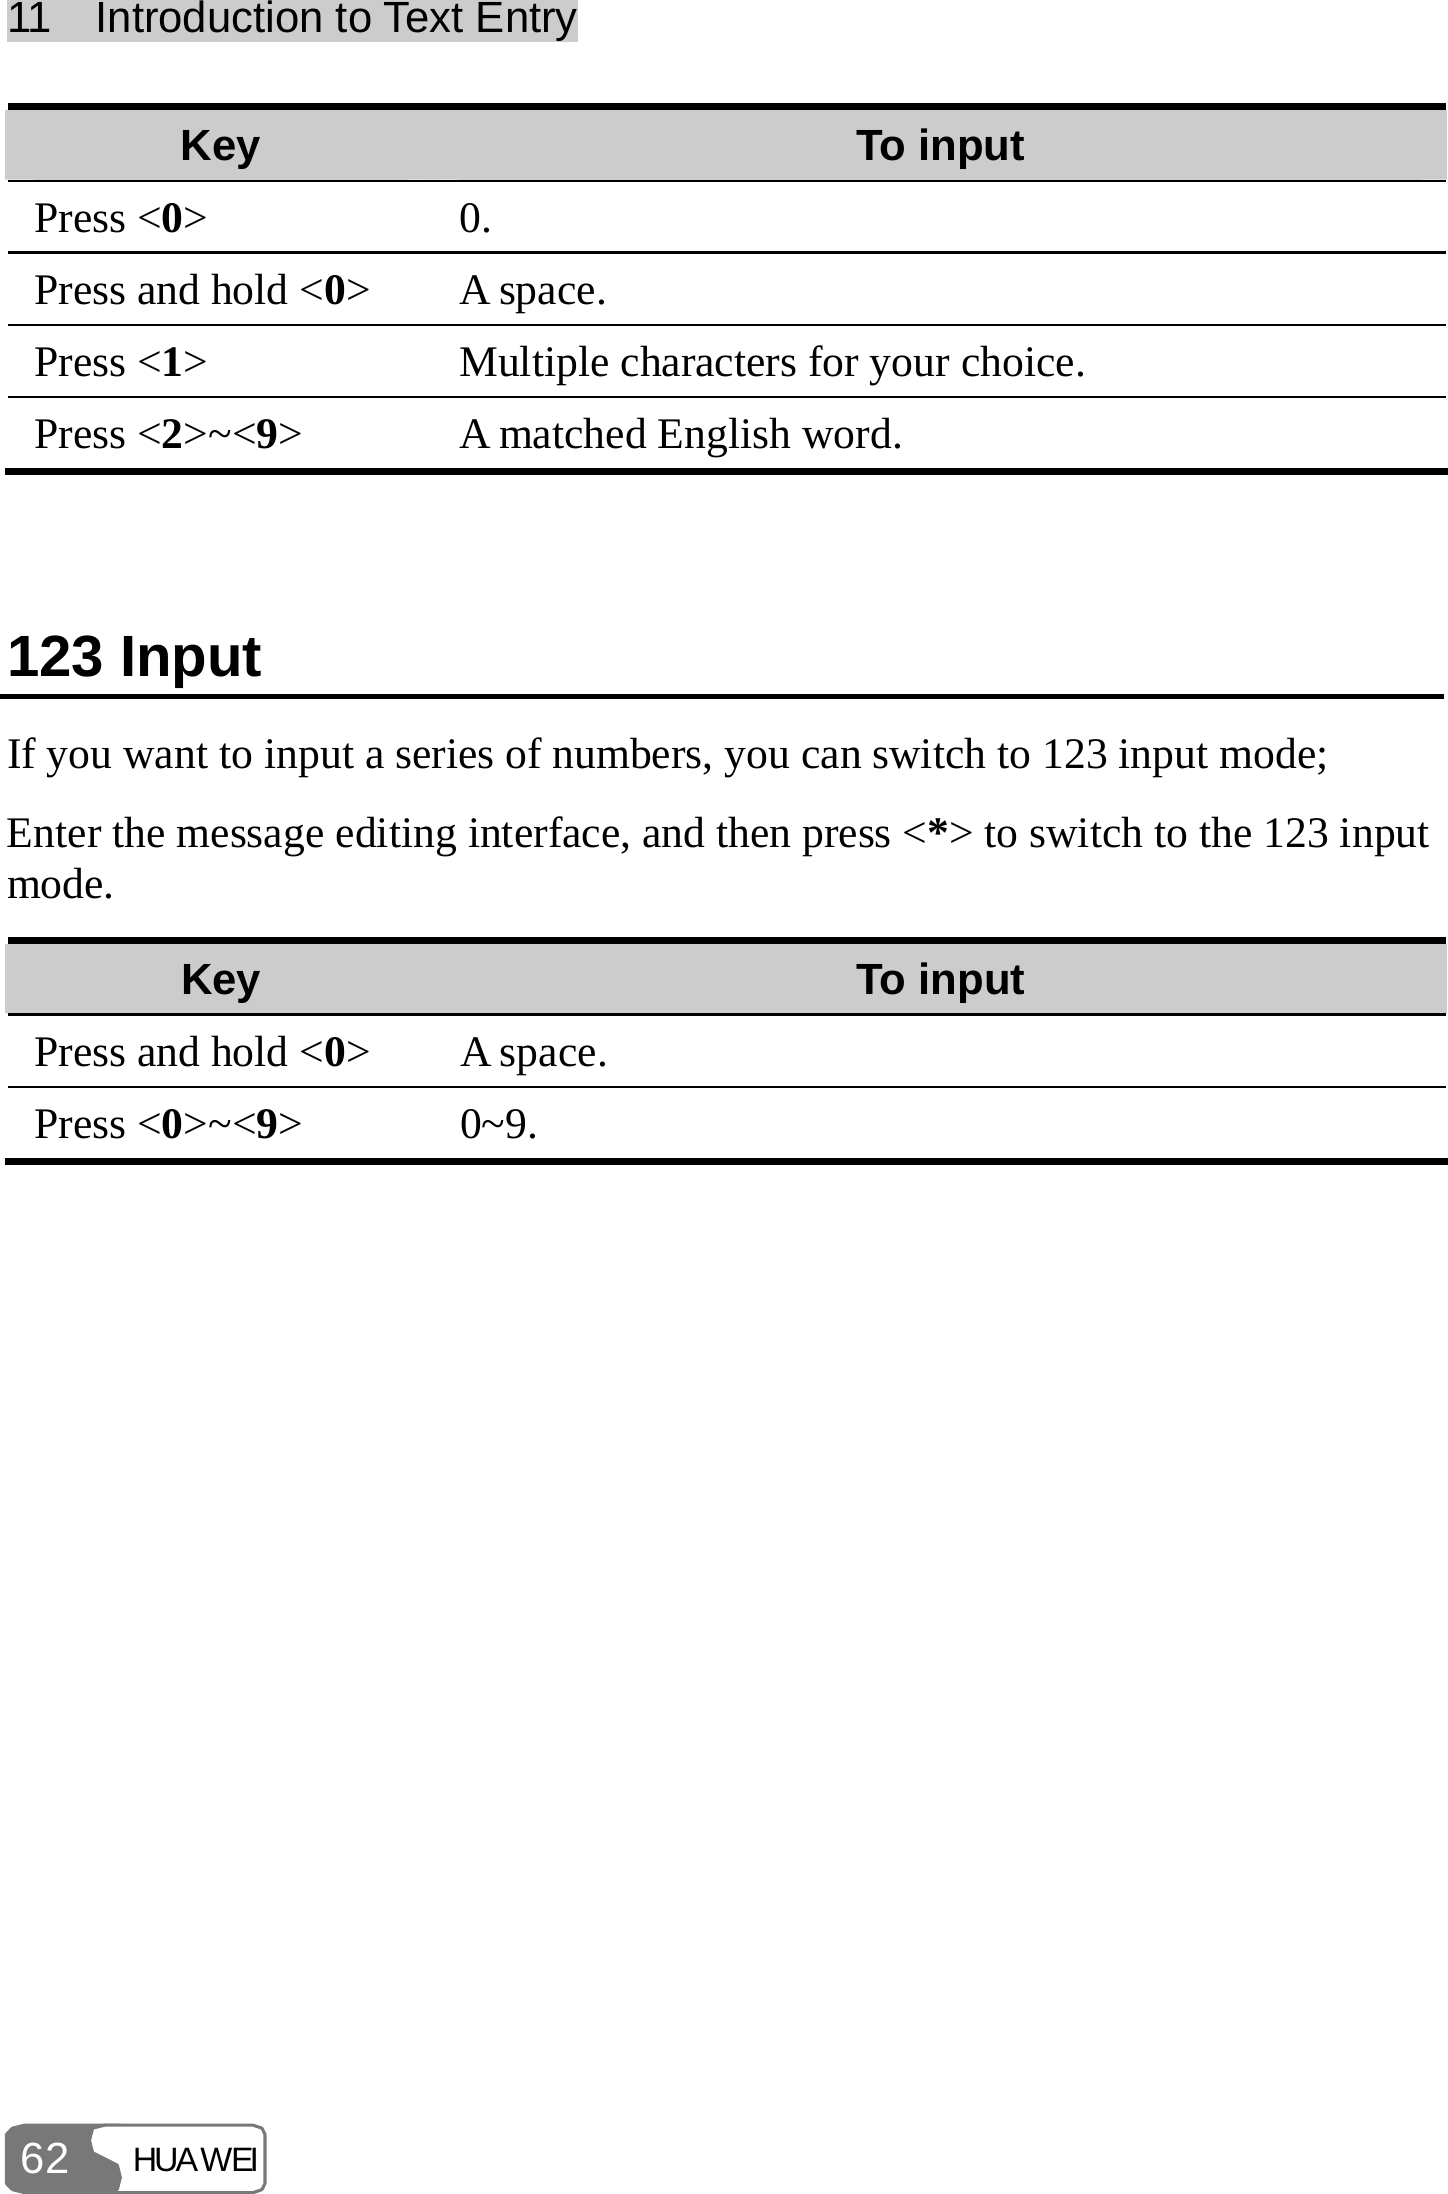 11    Introduction to Text Entry HUAWEI 62 Key  To input Press &lt;0&gt; 0. Press and hold &lt;0&gt; A space. Press &lt;1&gt;  Multiple characters for your choice. Press &lt;2&gt;~&lt;9&gt;  A matched English word.  123 Input If you want to input a series of numbers, you can switch to 123 input mode; Enter the message editing interface, and then press &lt;*&gt; to switch to the 123 input mode. Key  To input Press and hold &lt;0&gt; A space. Press &lt;0&gt;~&lt;9&gt; 0~9. 